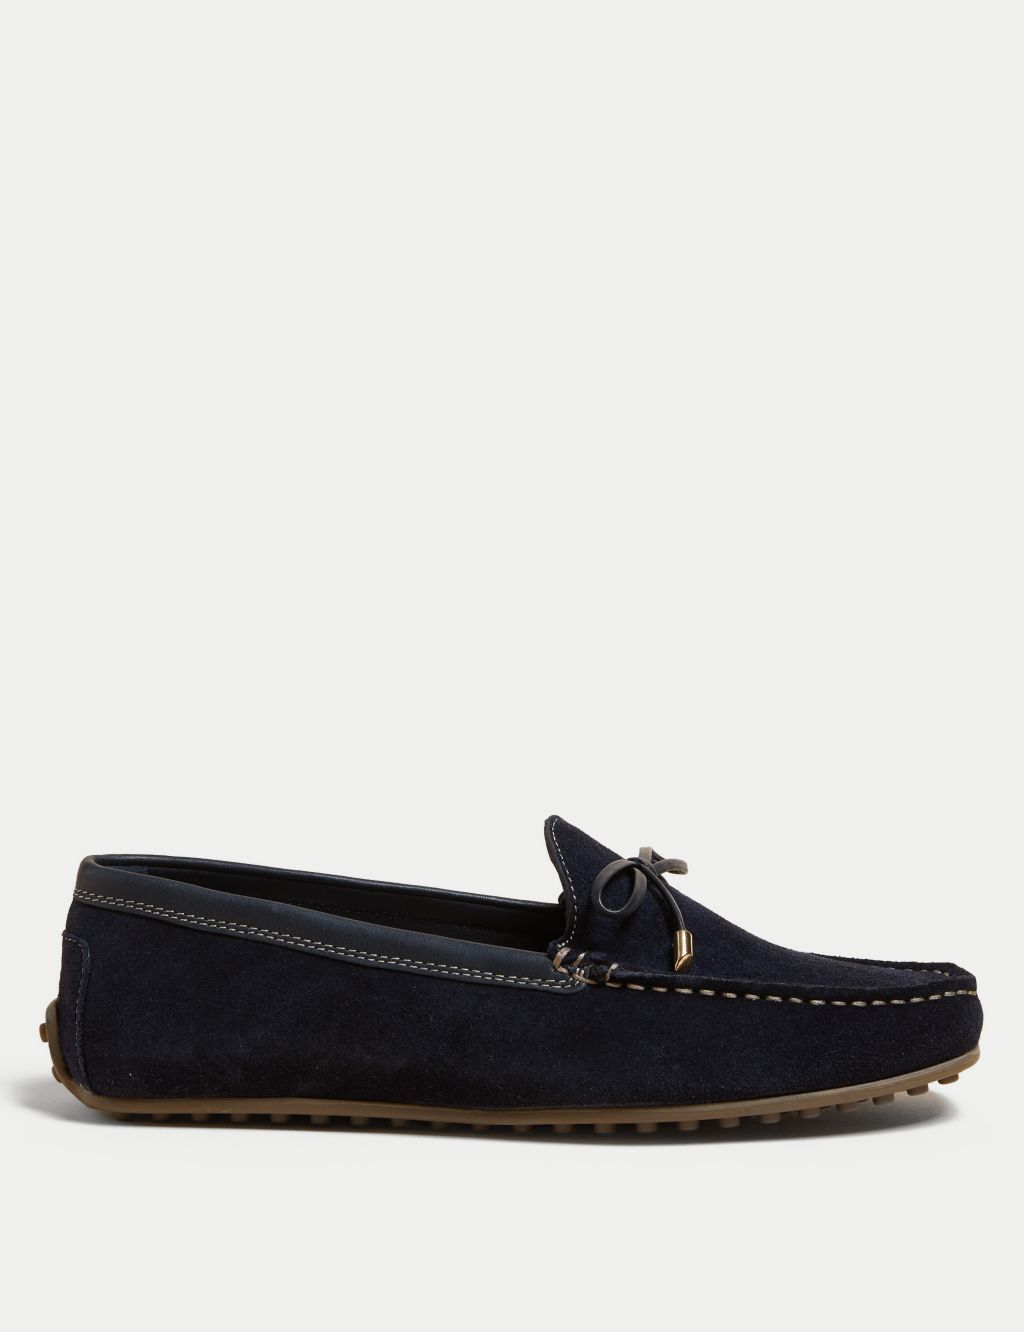 Wide Fit Suede Bow Boat Shoes image 1